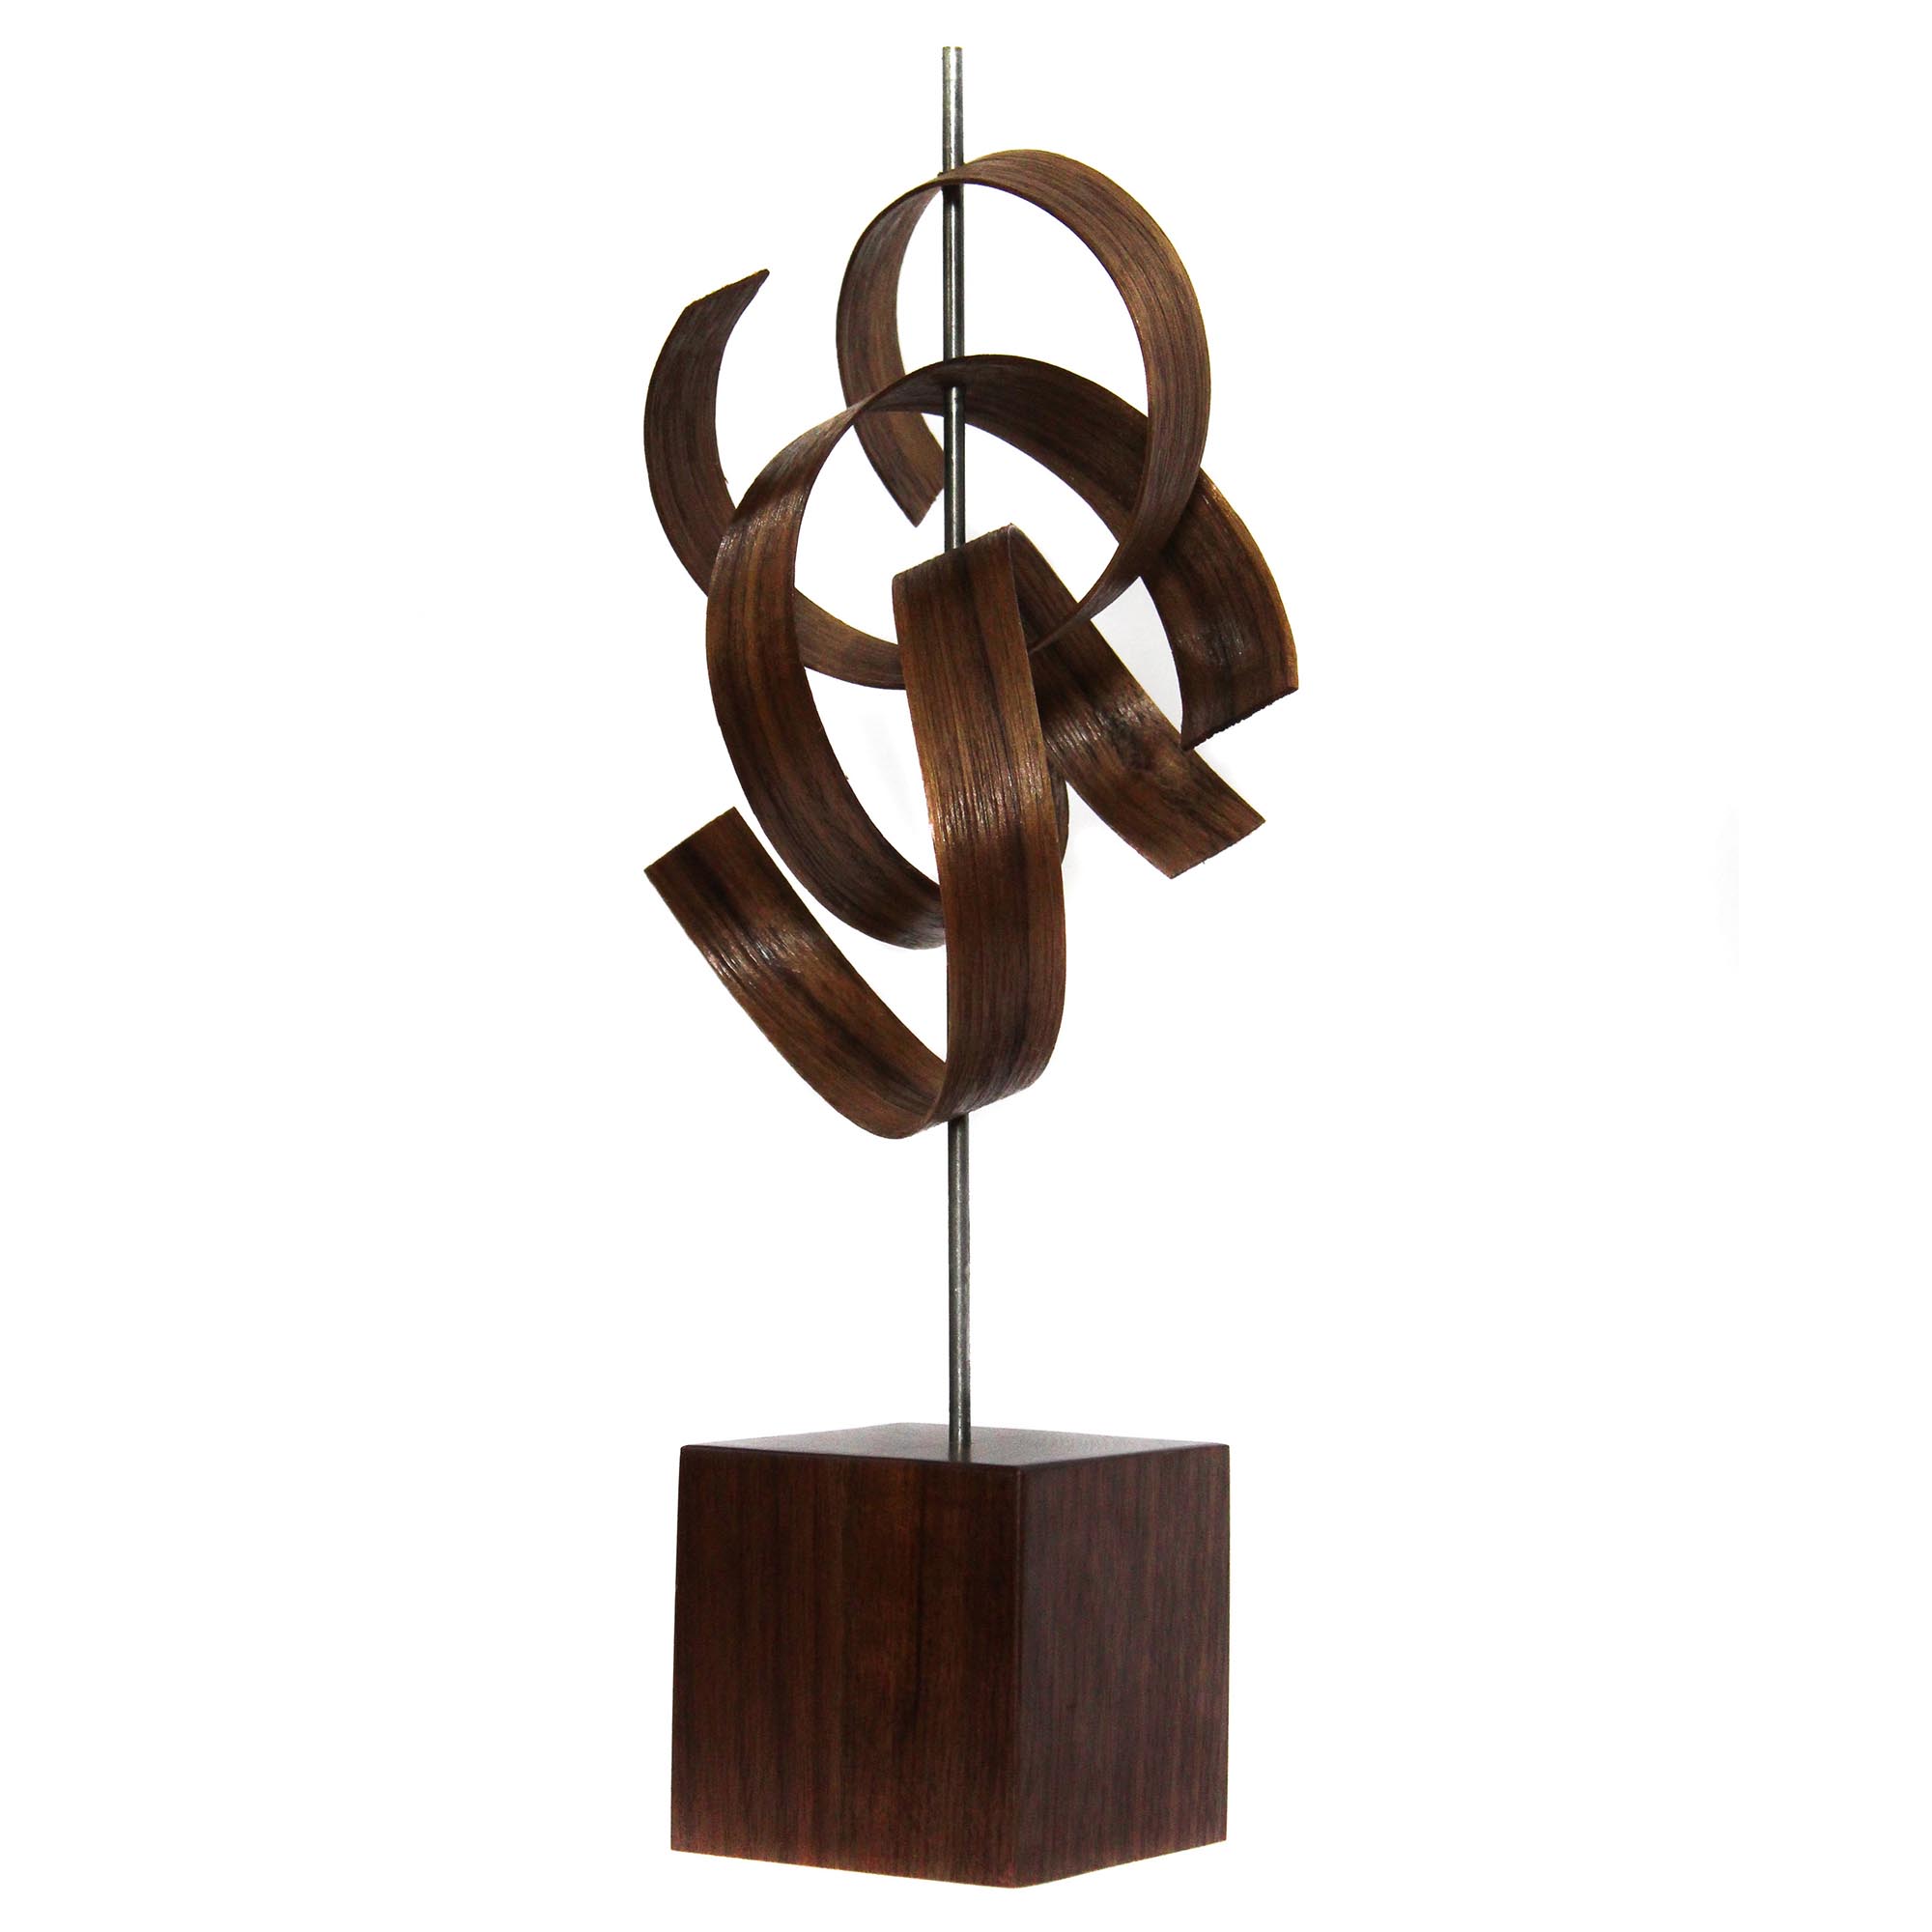 Jackson Wright 'Scribble' 6in x 16in Contemporary Style Modern Wood Sculpture